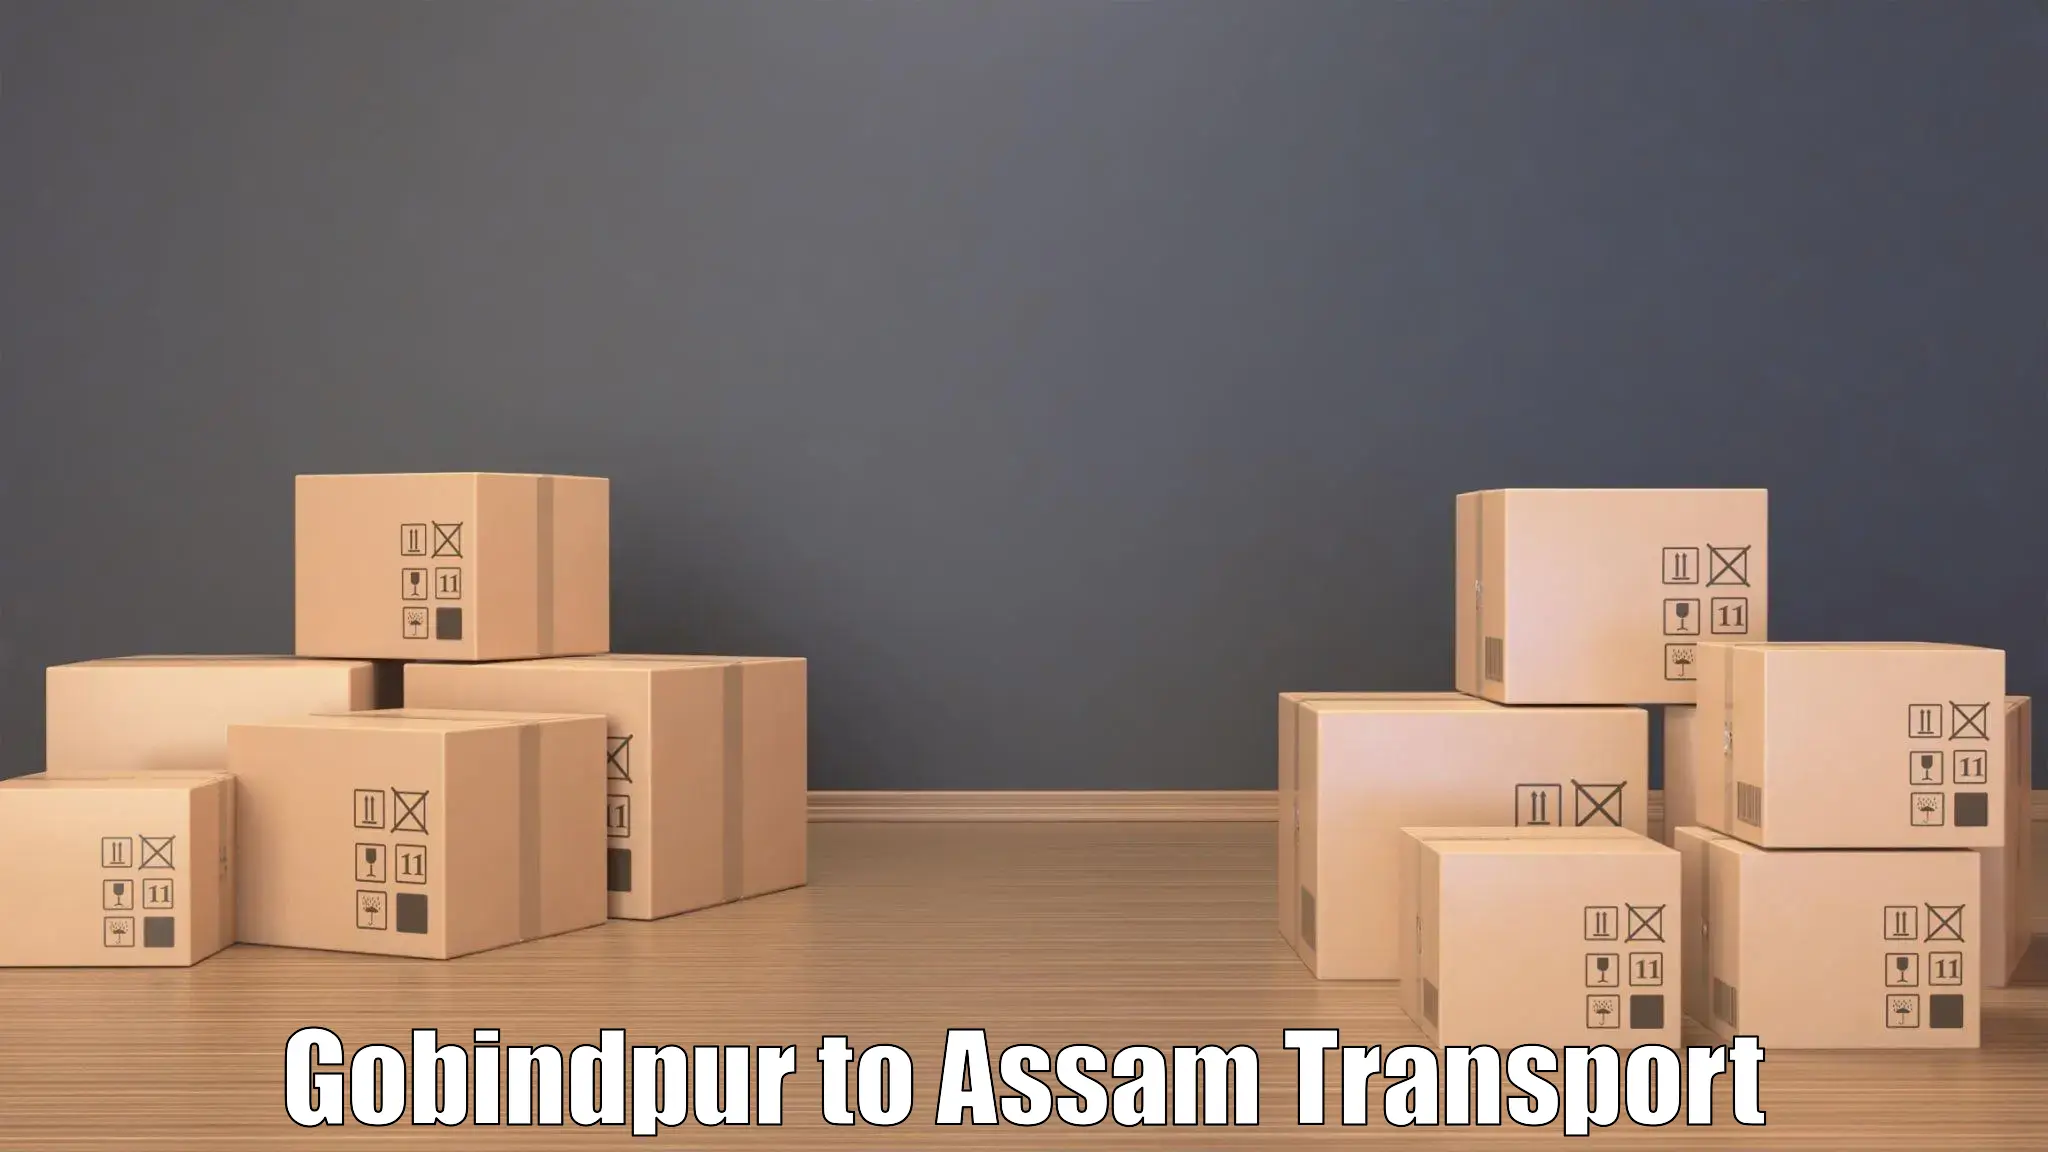 Package delivery services Gobindpur to Jorhat